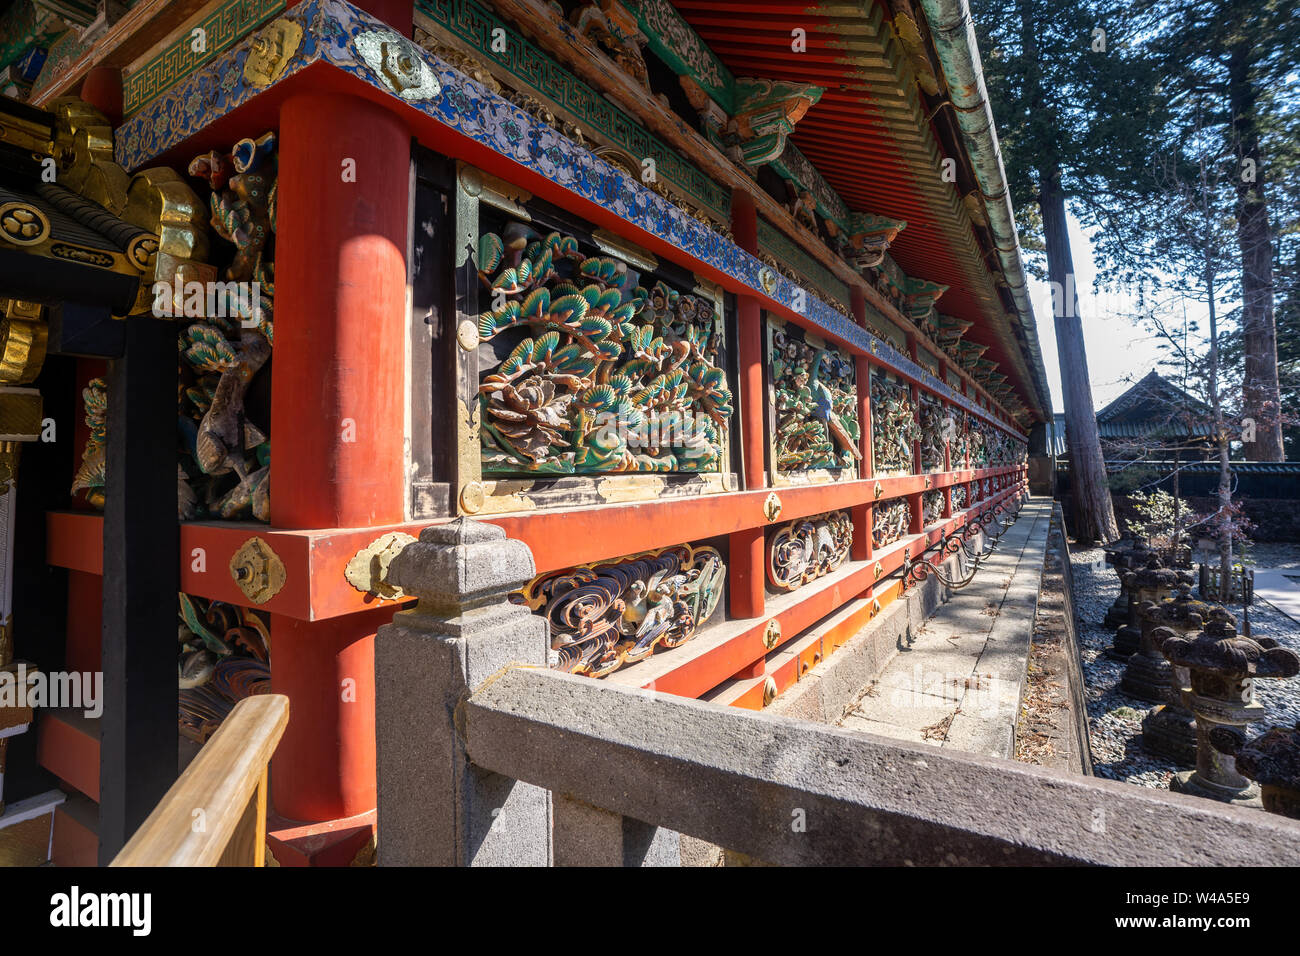 Yomeimon Gate. Japan's most ornate structure, giving off a grand and imposing air with its intricate decorations and features. Nikko, Japan Stock Photo